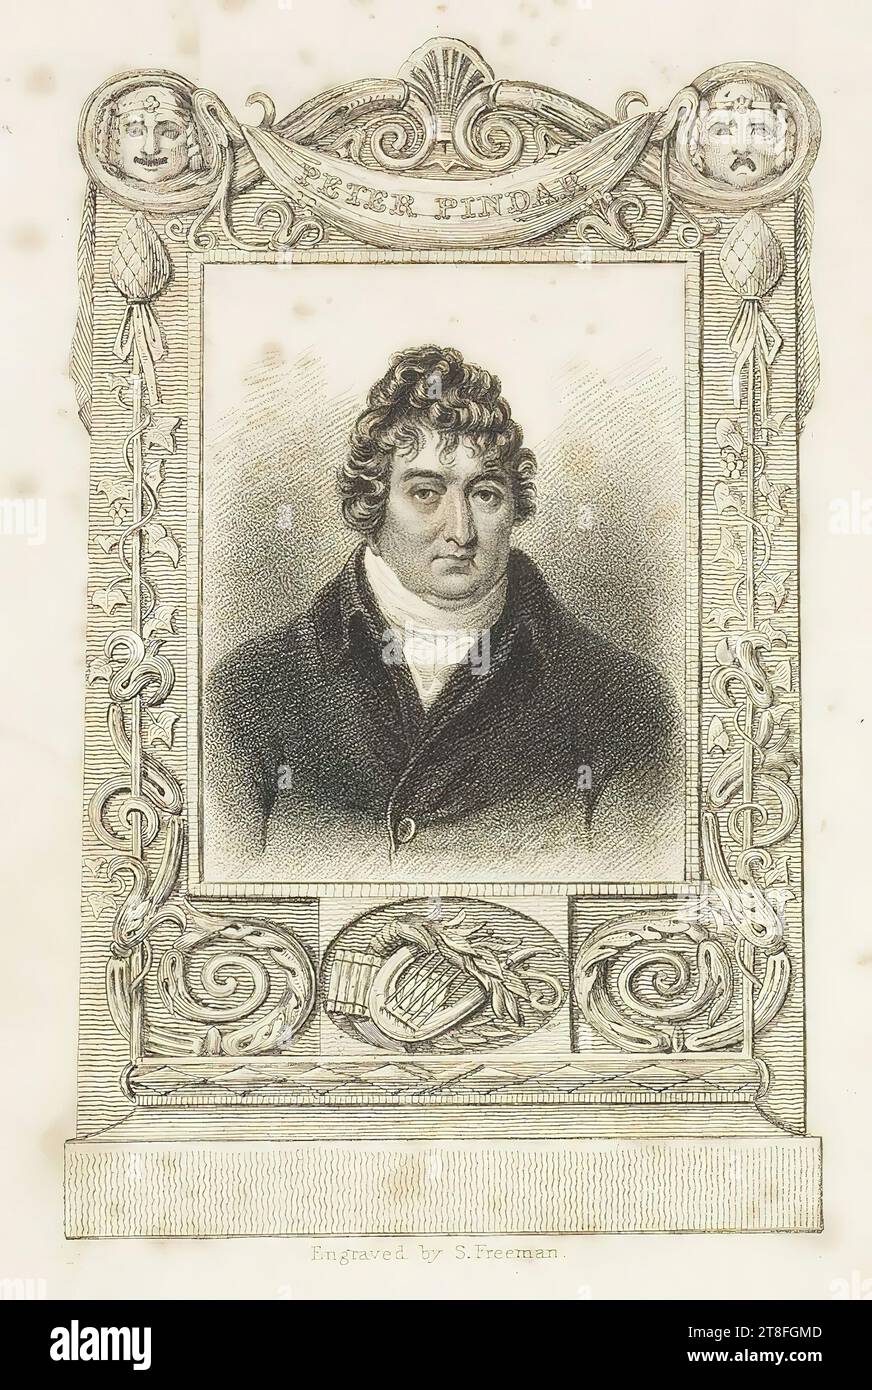 PETER PINDAR. Engraved by S.Freeman. Published by Thos. Tegg. Cheapside Stock Photo